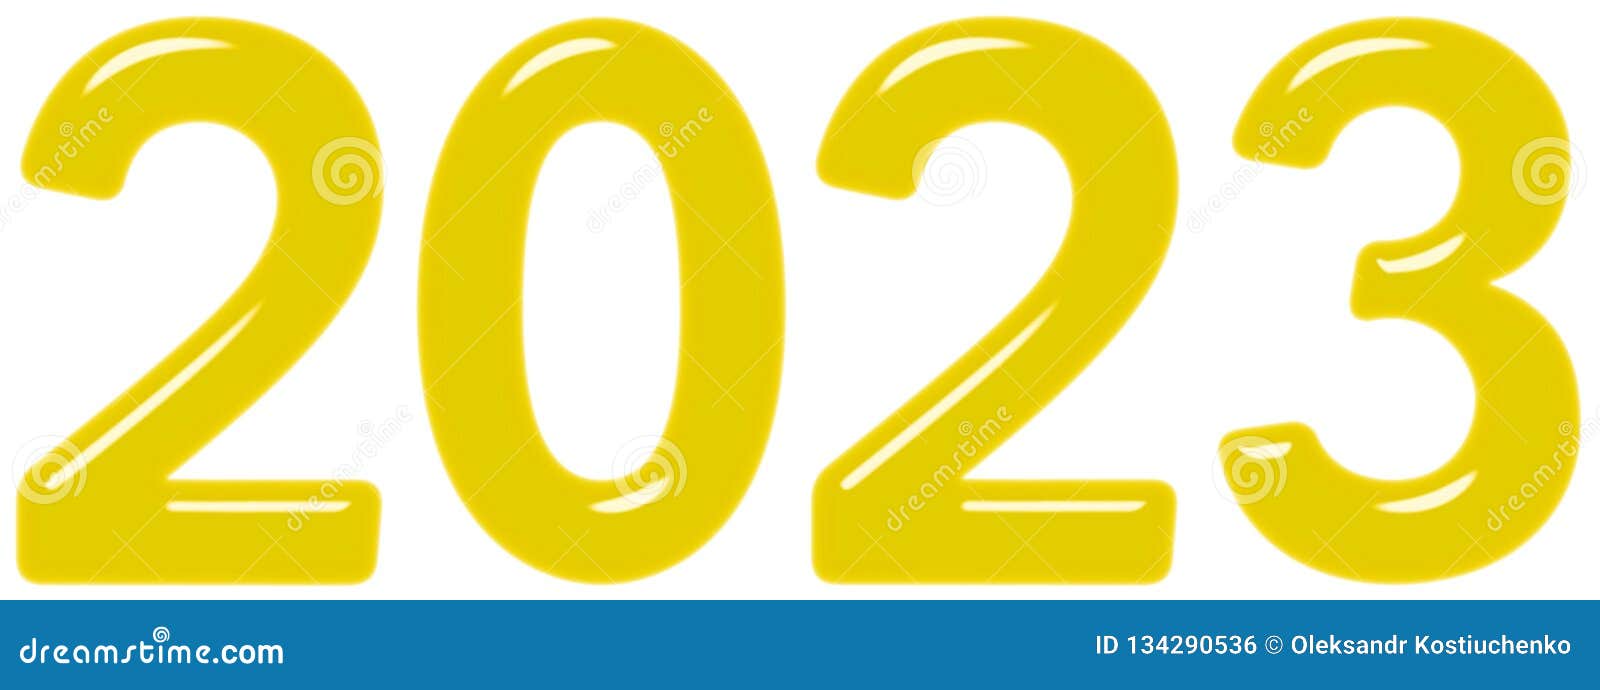 Inscription Yellow Glass Plastic Isolated White Background D Render Inscription Yellow Glass Plastic Isolated 134290536 